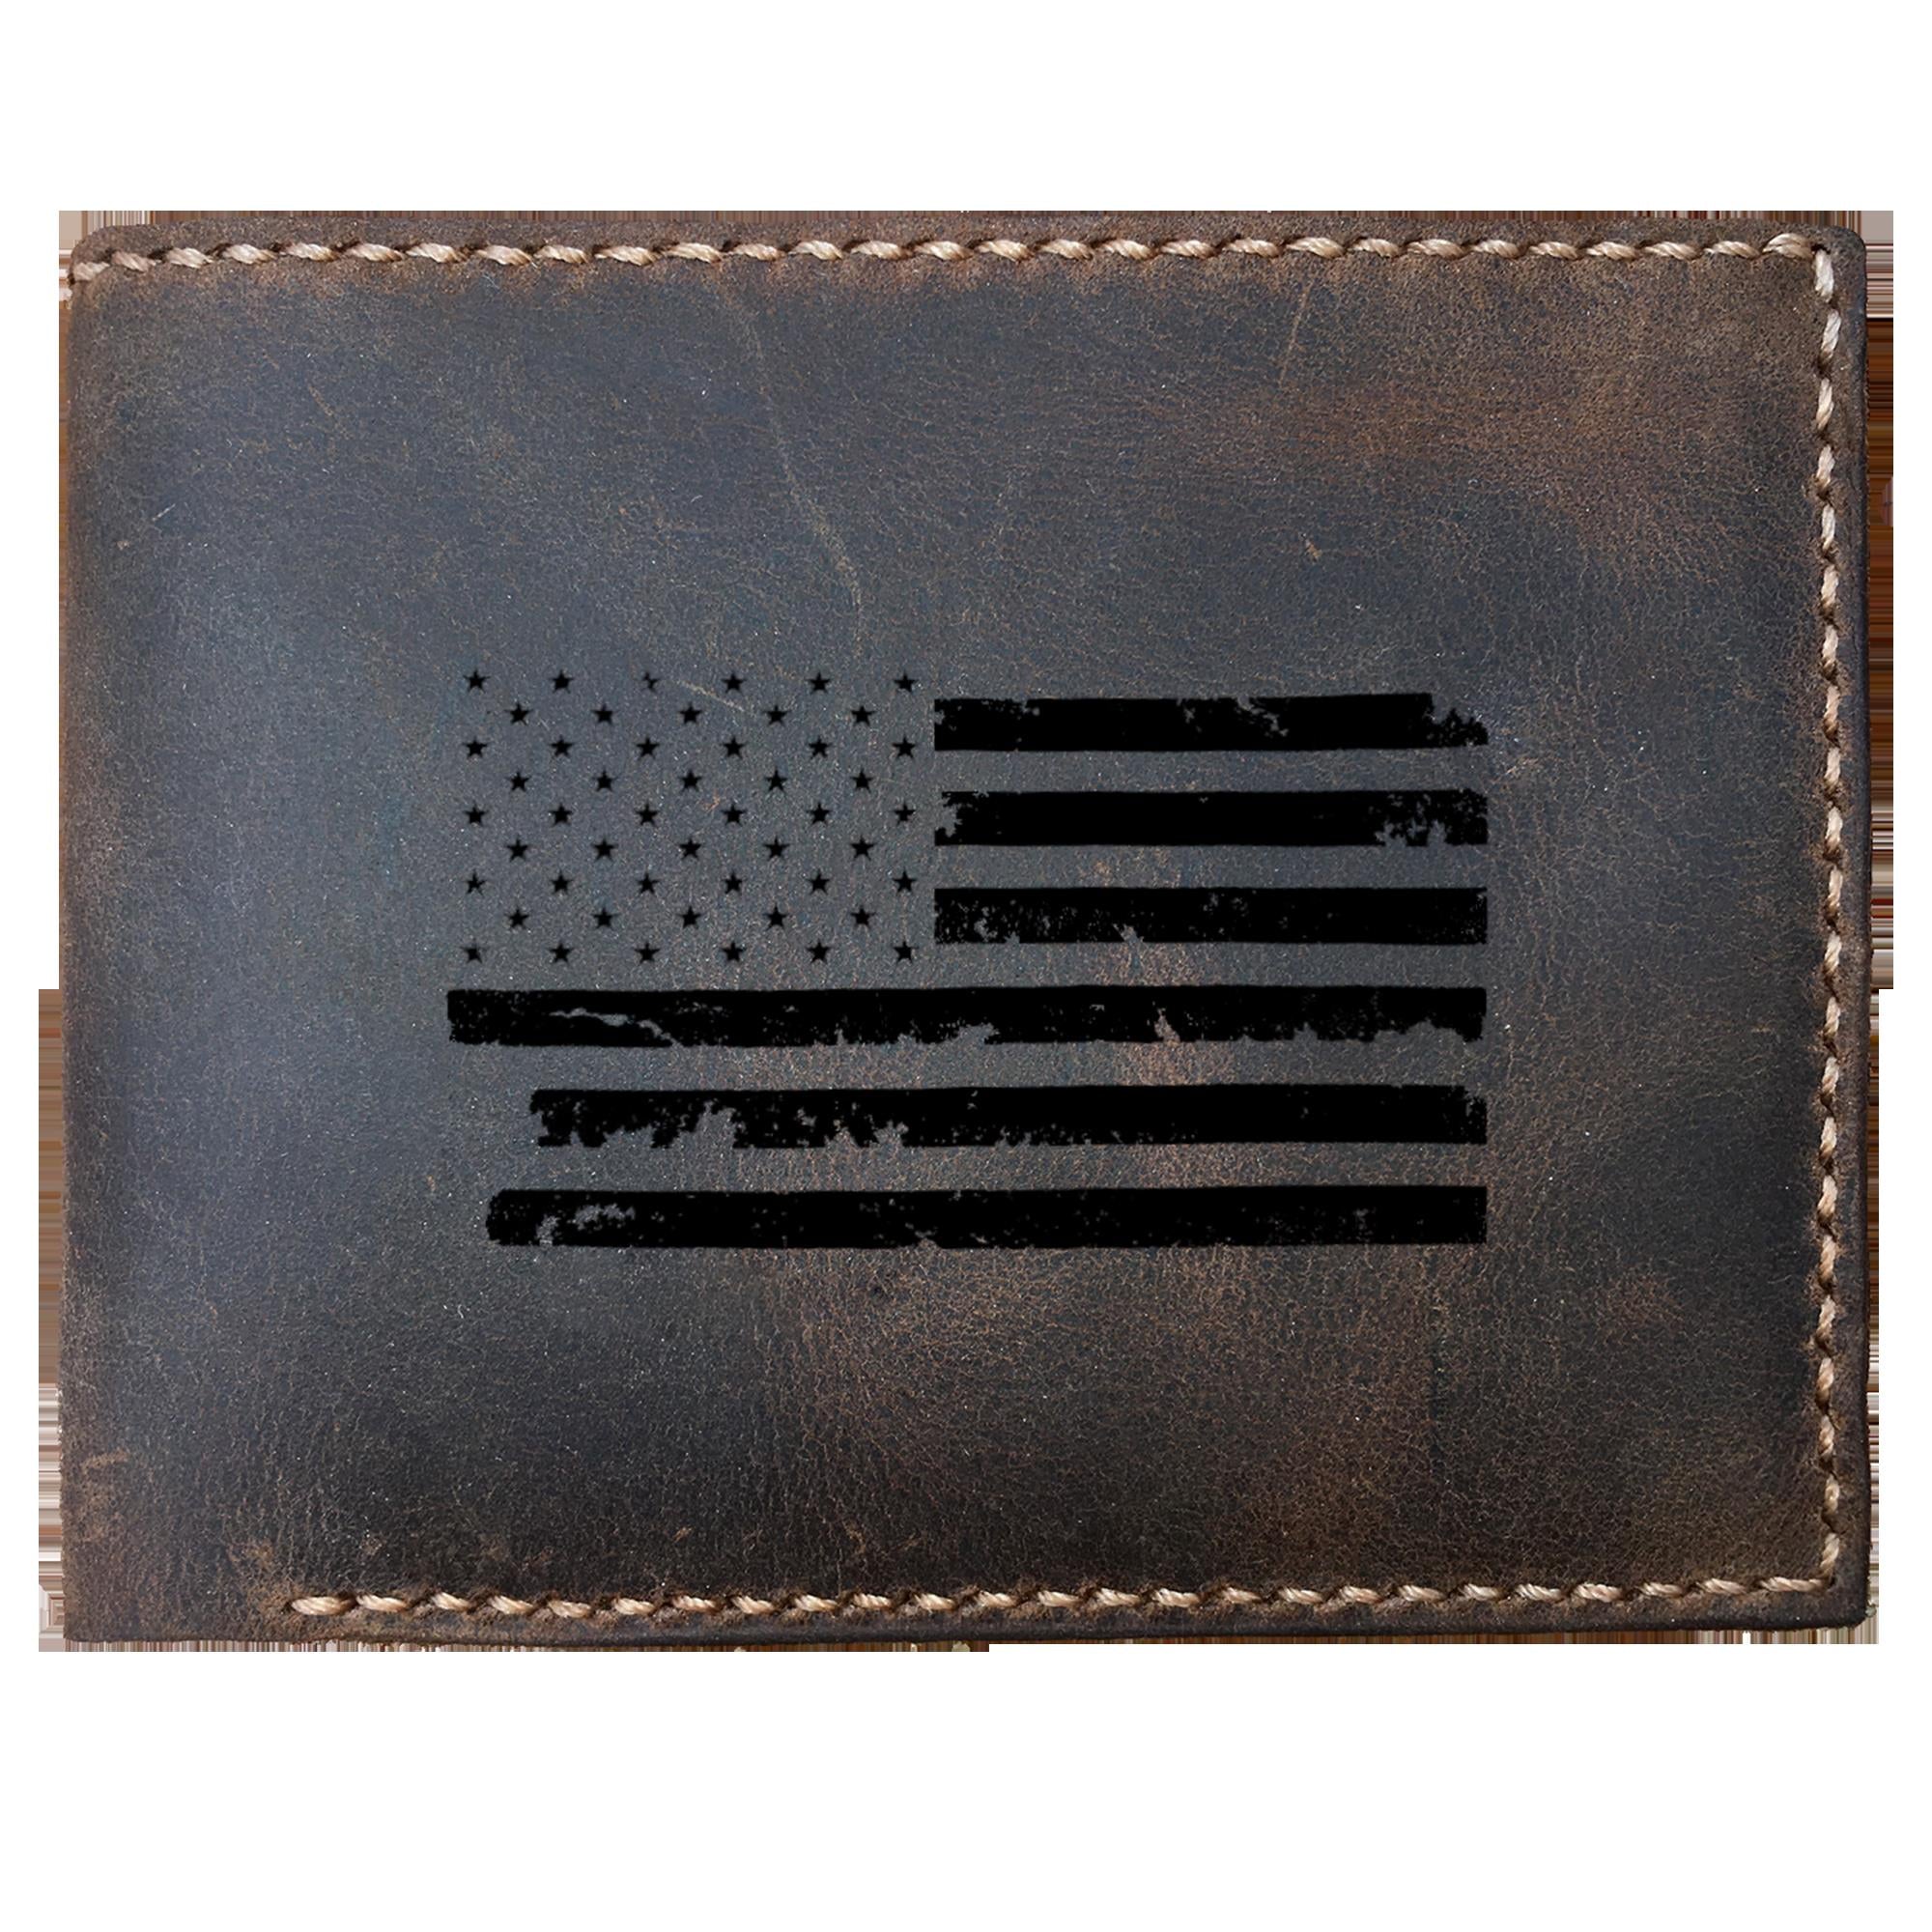 Skitongifts Funny Custom Laser Engraved Bifold Leather Wallet For Men, Thin Green Line Federal Agents Border Patrol Park Ranger